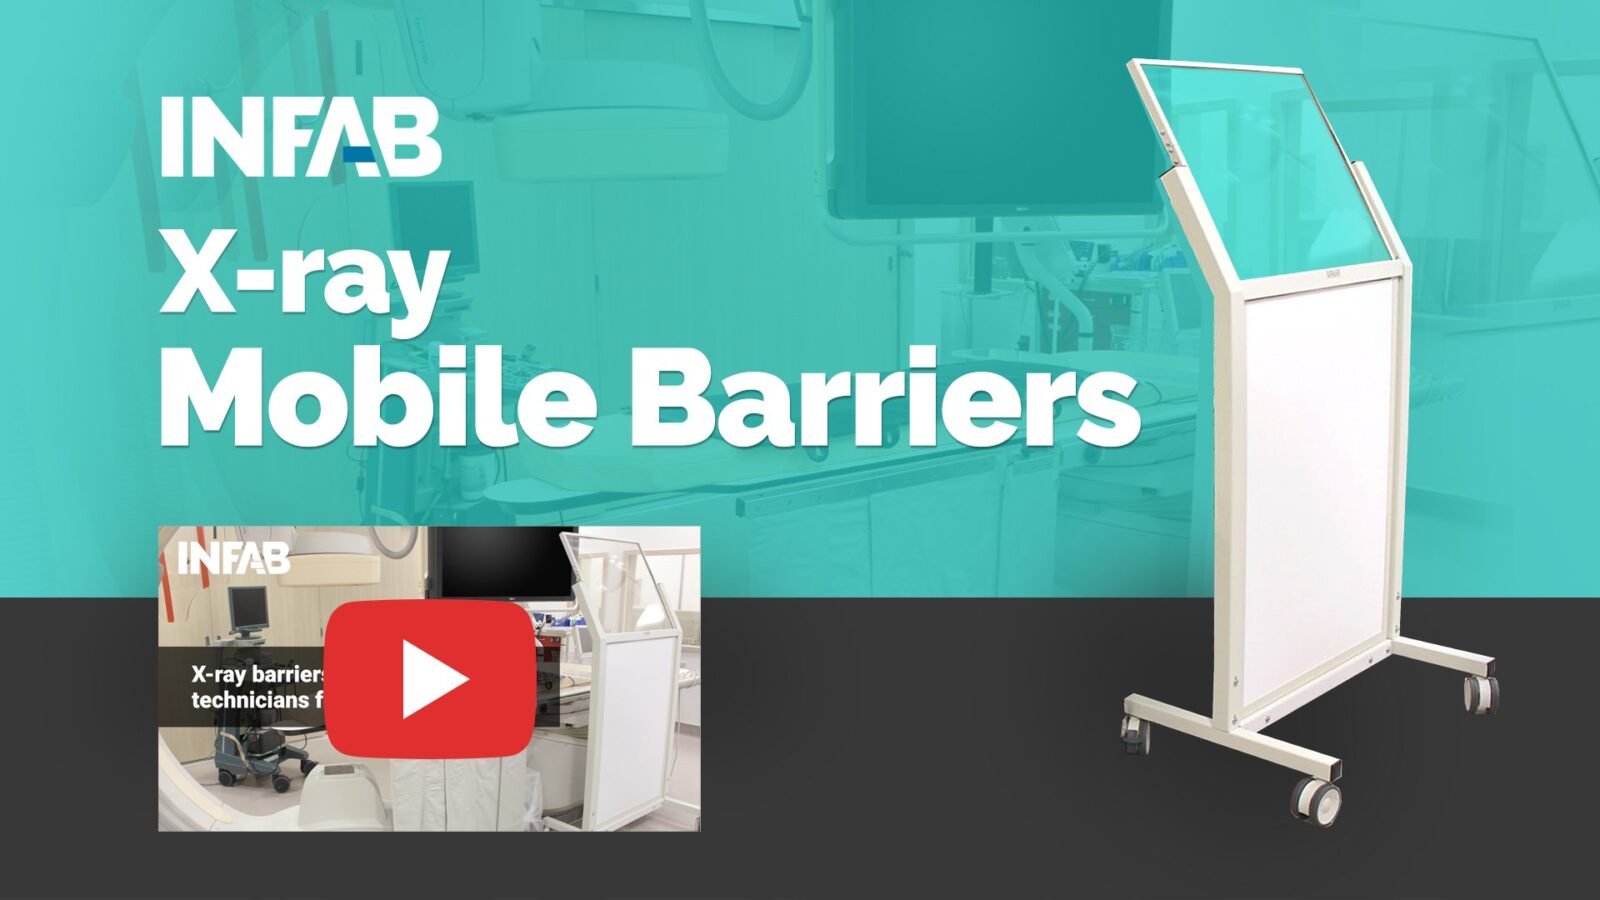 The Infab X-ray Mobile Barriers